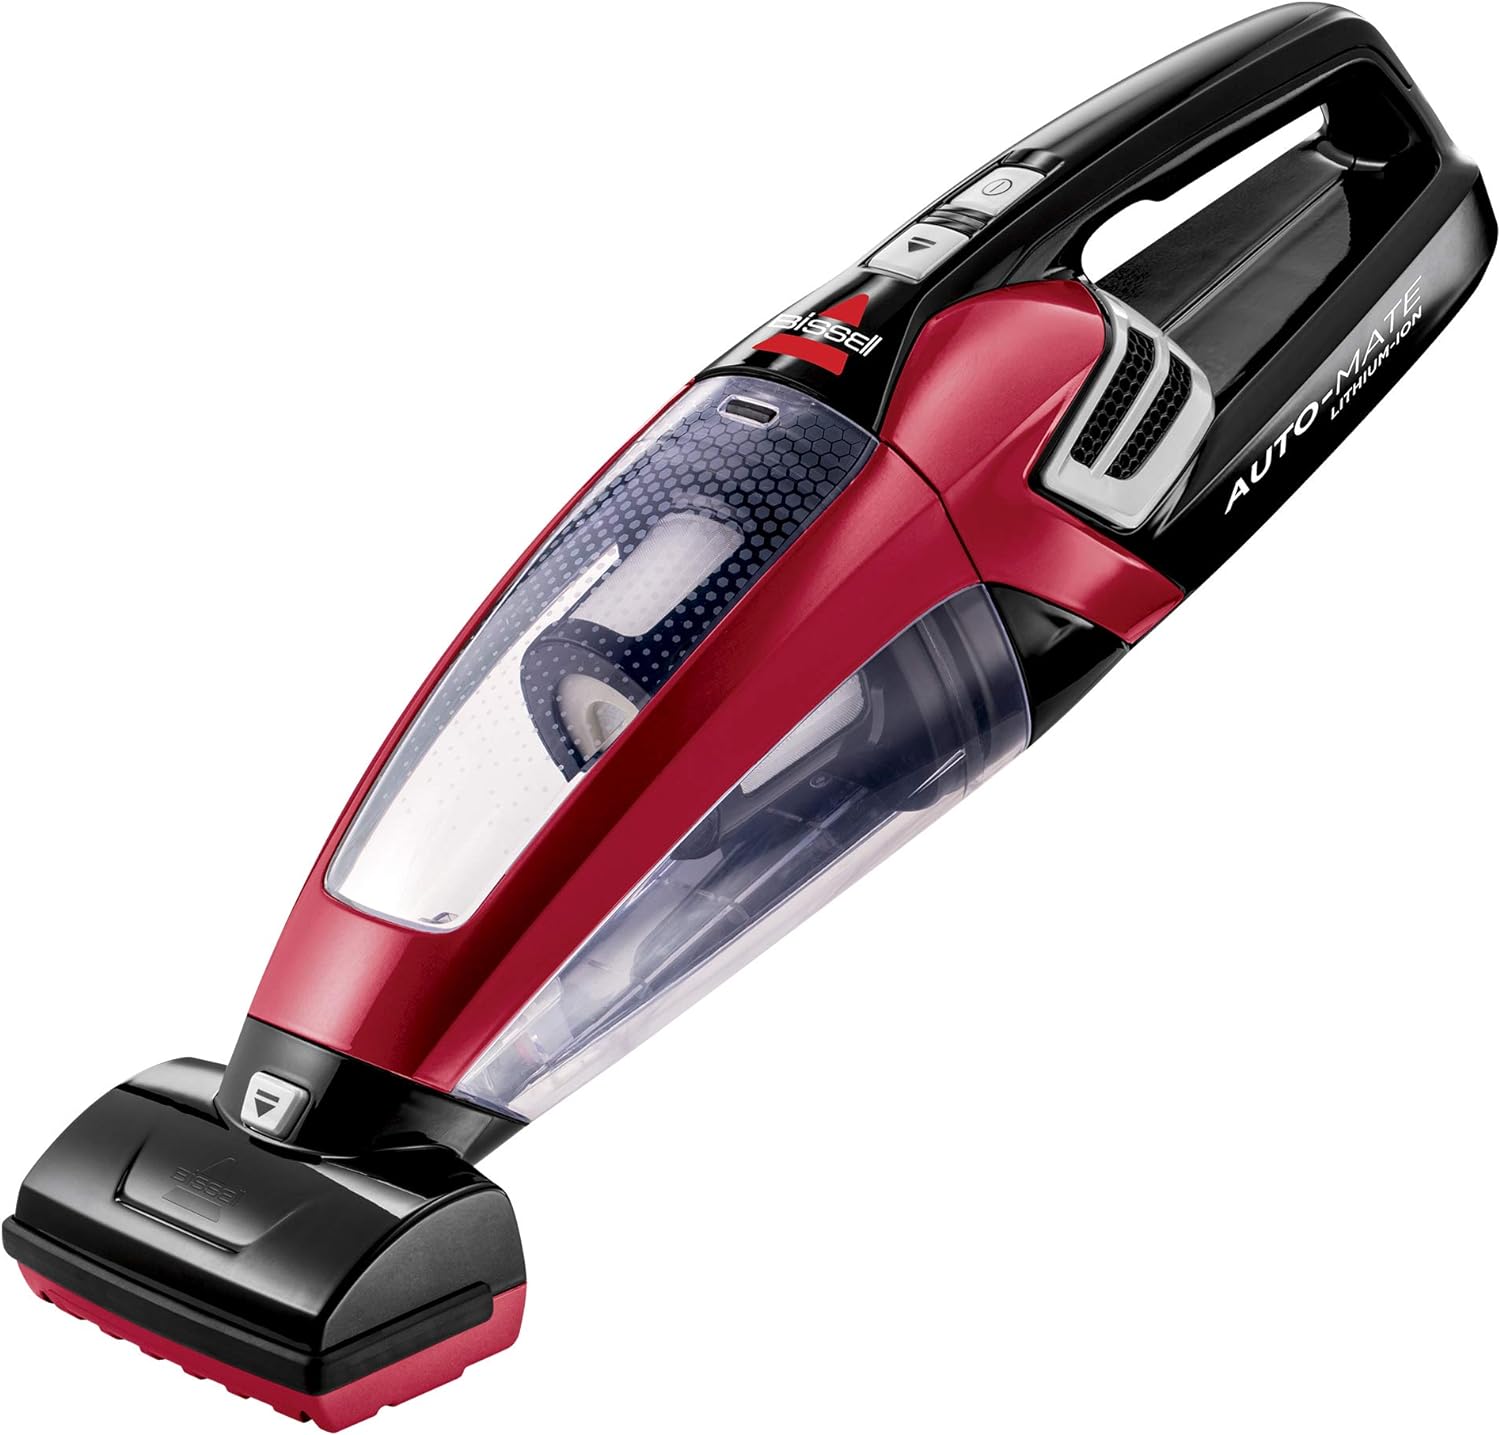 BISSELL AutoMate Lithium Ion Cordless Handheld car Vacuum, 2284W, Red